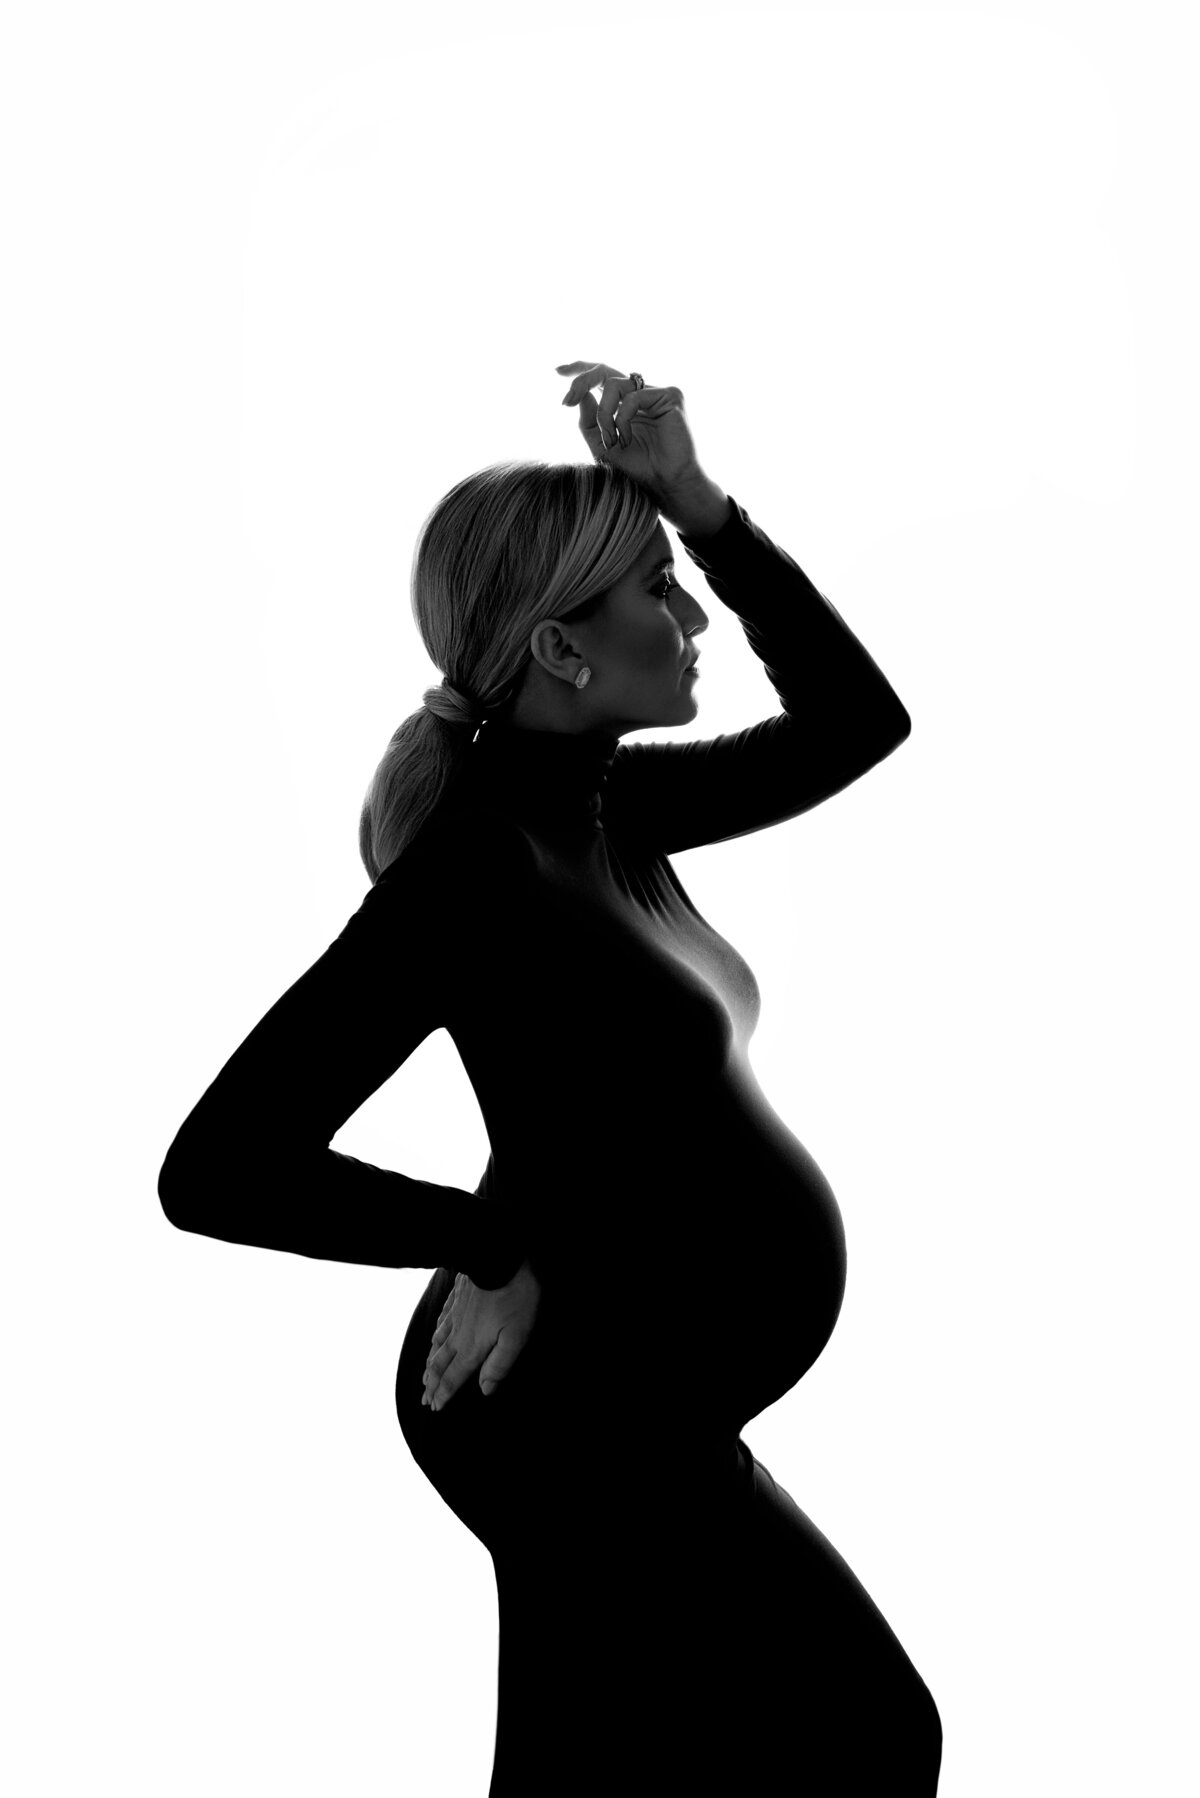 Woman poses for fine art maternity photos with Main Line's best maternity photographer Katie Marshall. Black and white image. Woman is standing side profile in a long-sleeved body con dress.  One hand is on the small of her back, the other hand has her wrist resting on her forehead. Her eyes are closed.